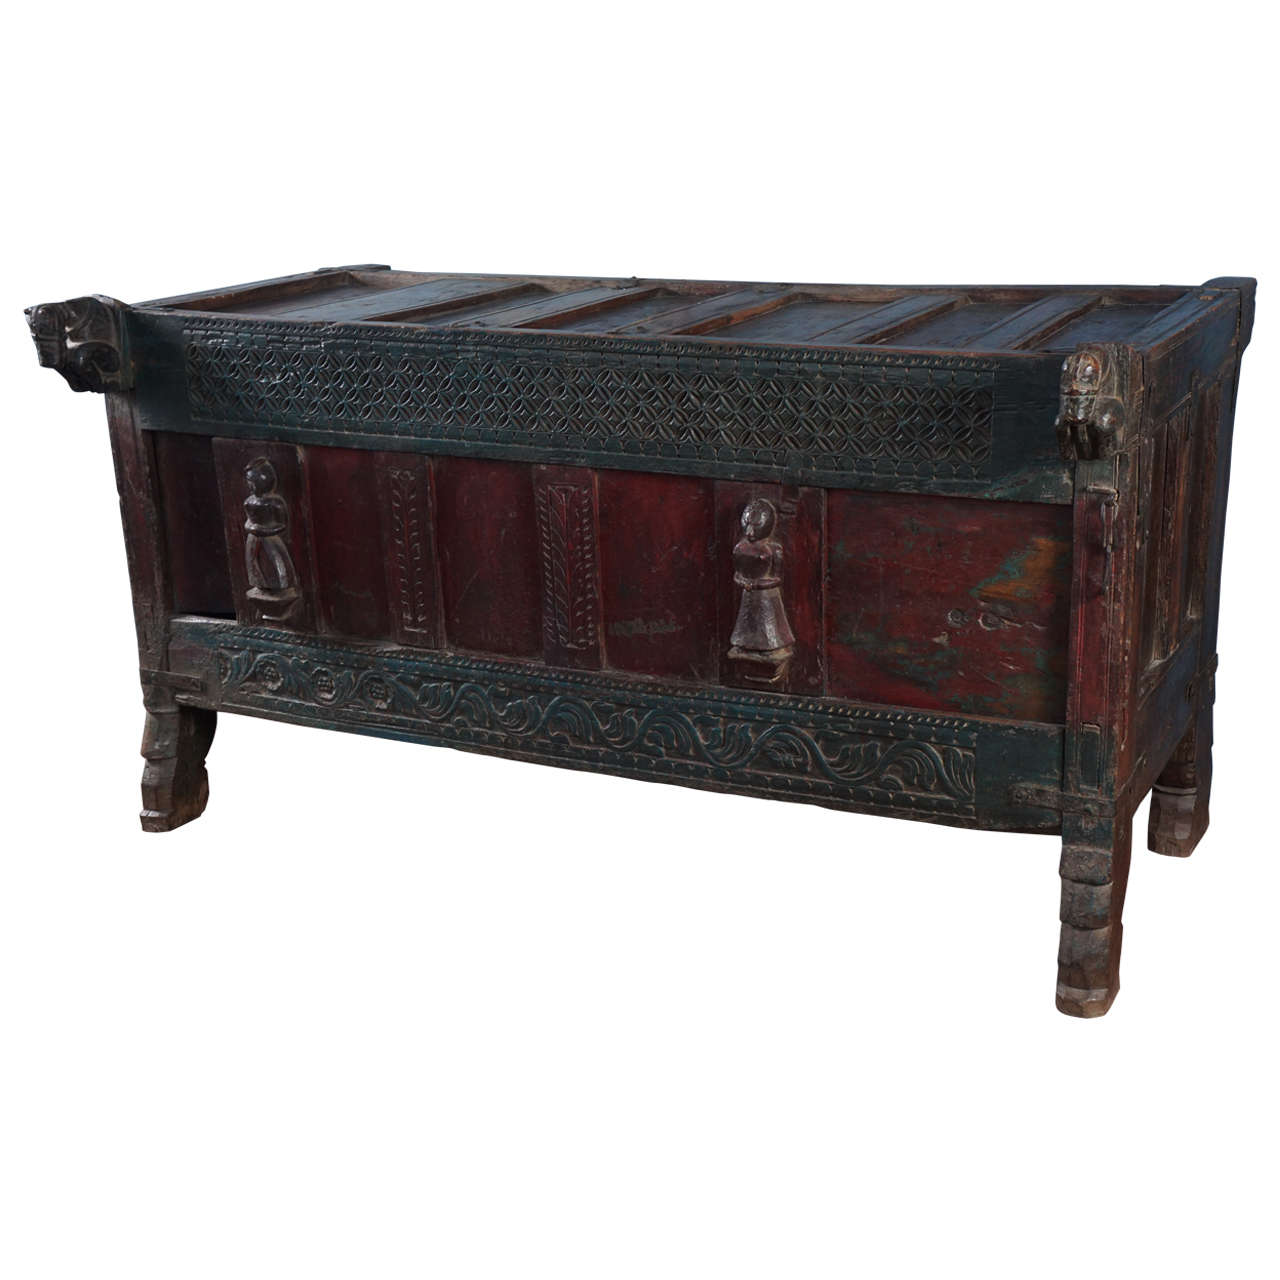 19th Century Green and Red Teakwood Damchiya Dowry Chest